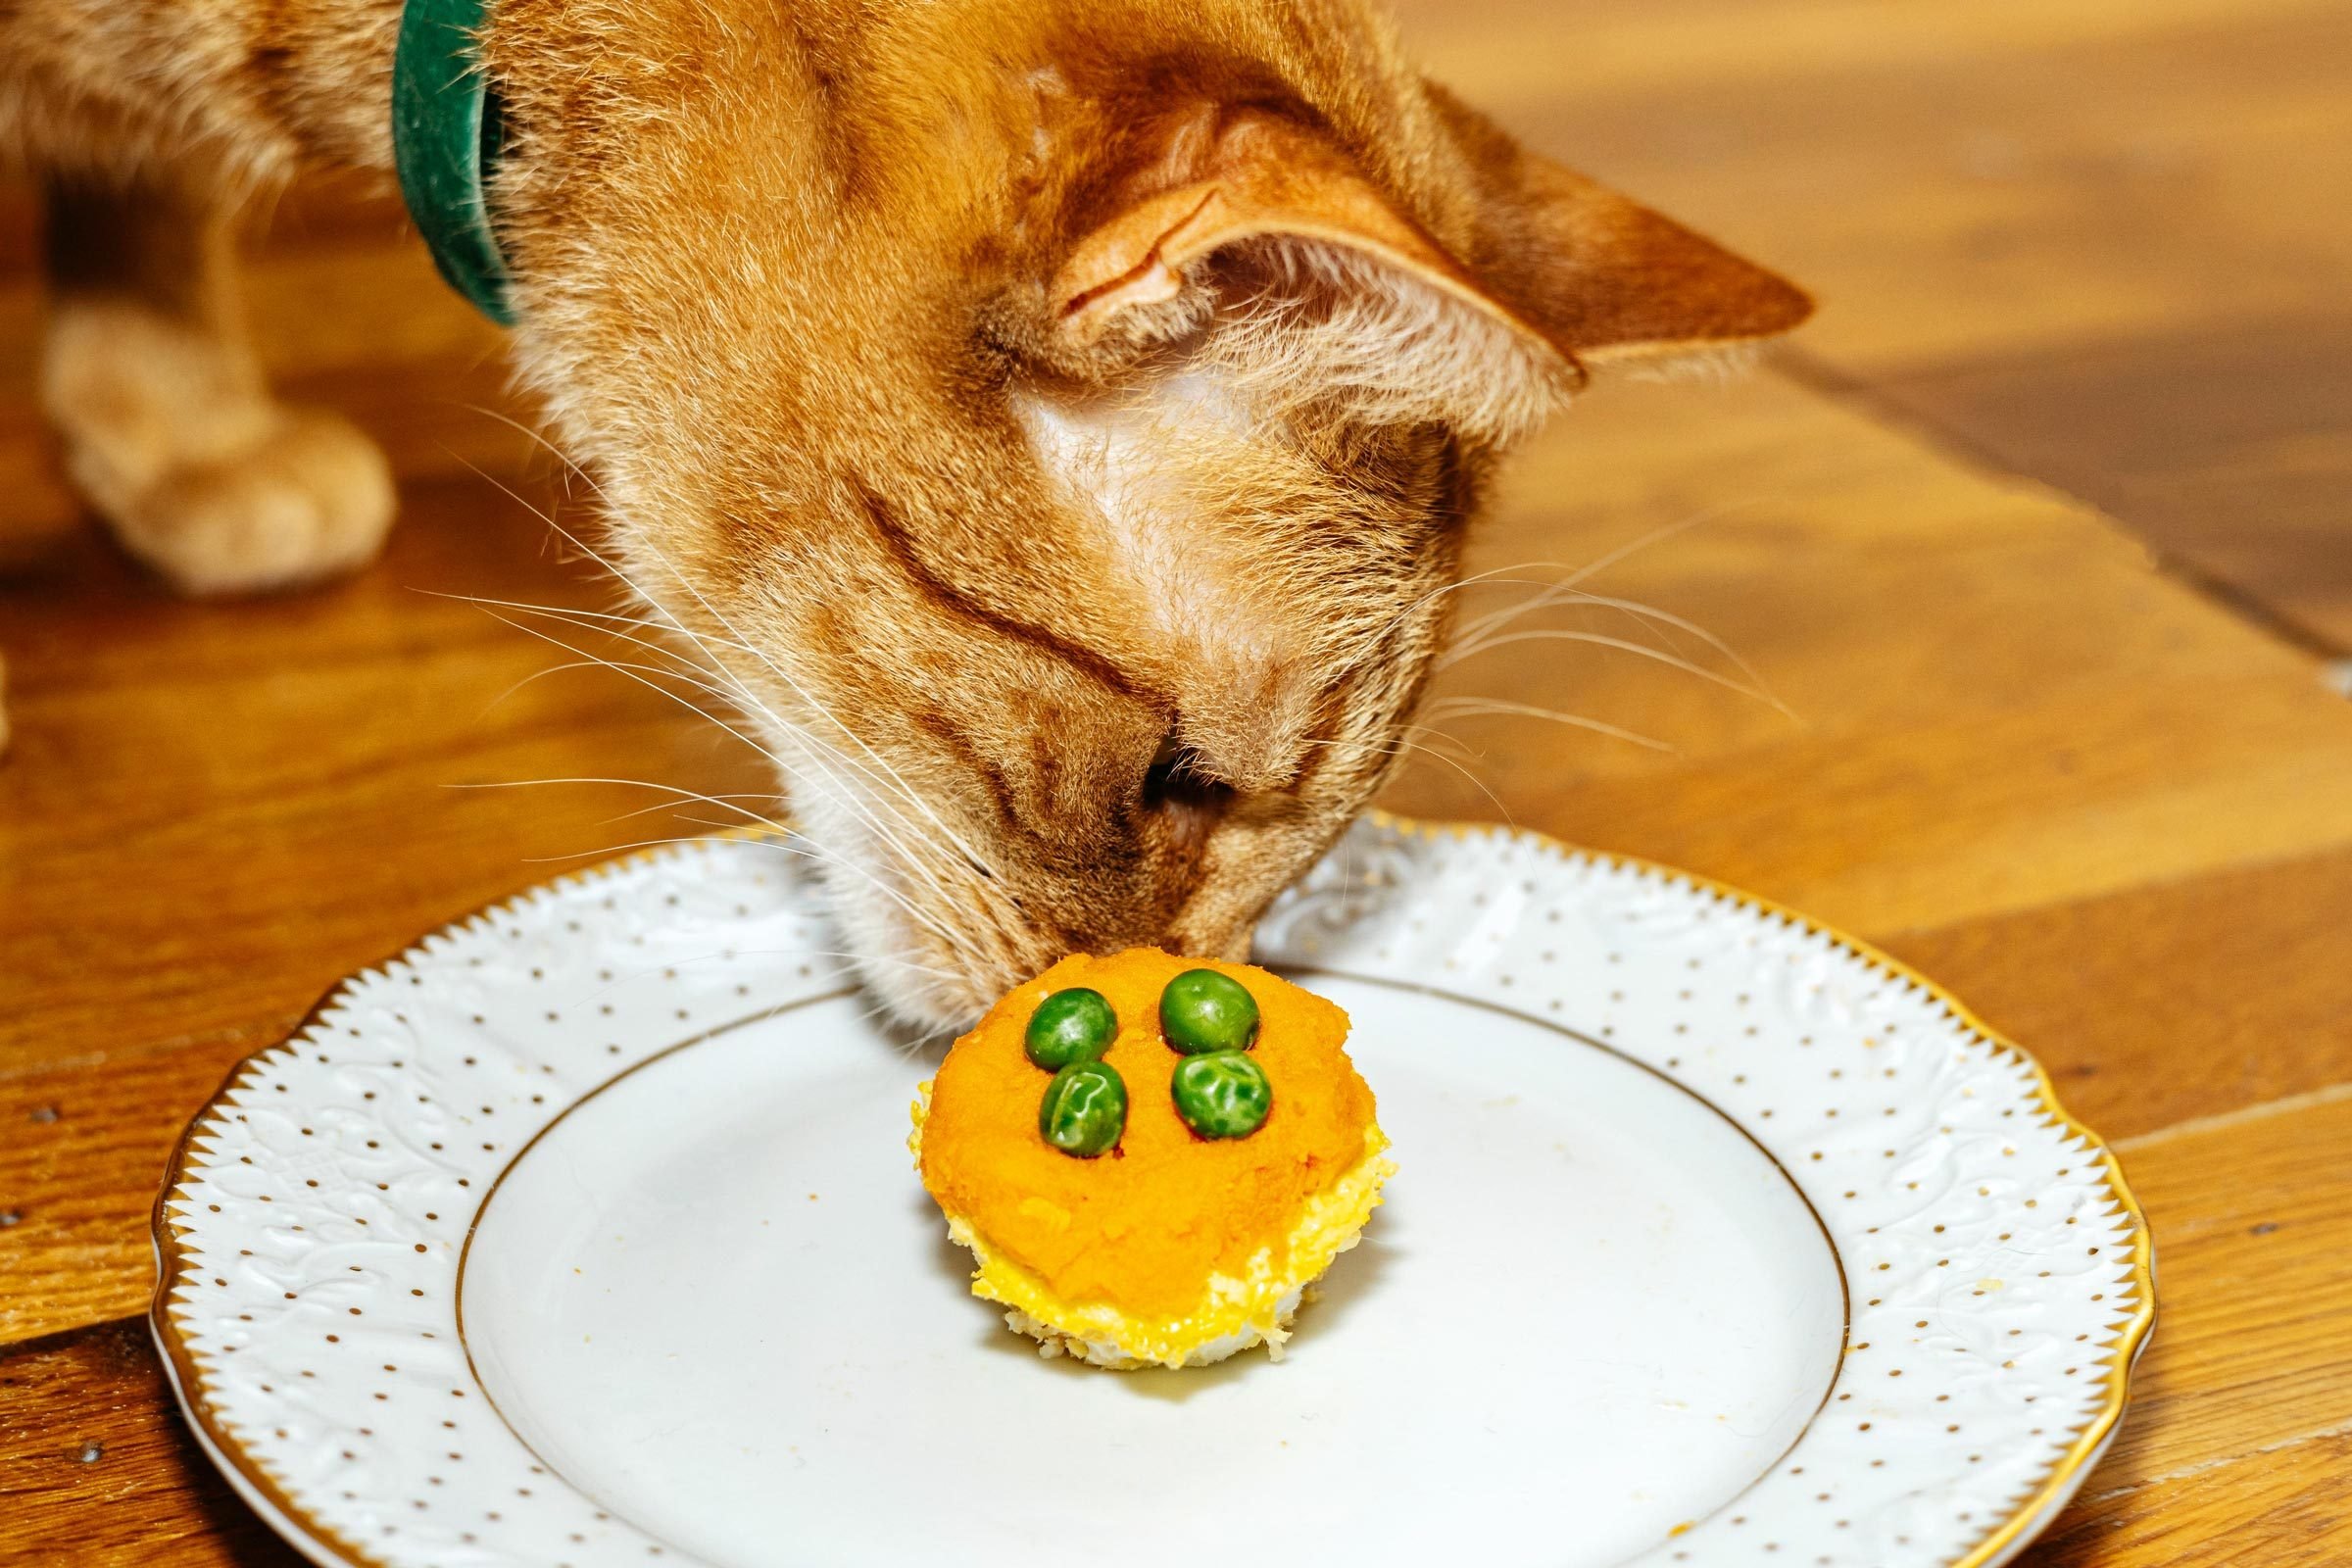 How to Make a Cat Birthday Cake